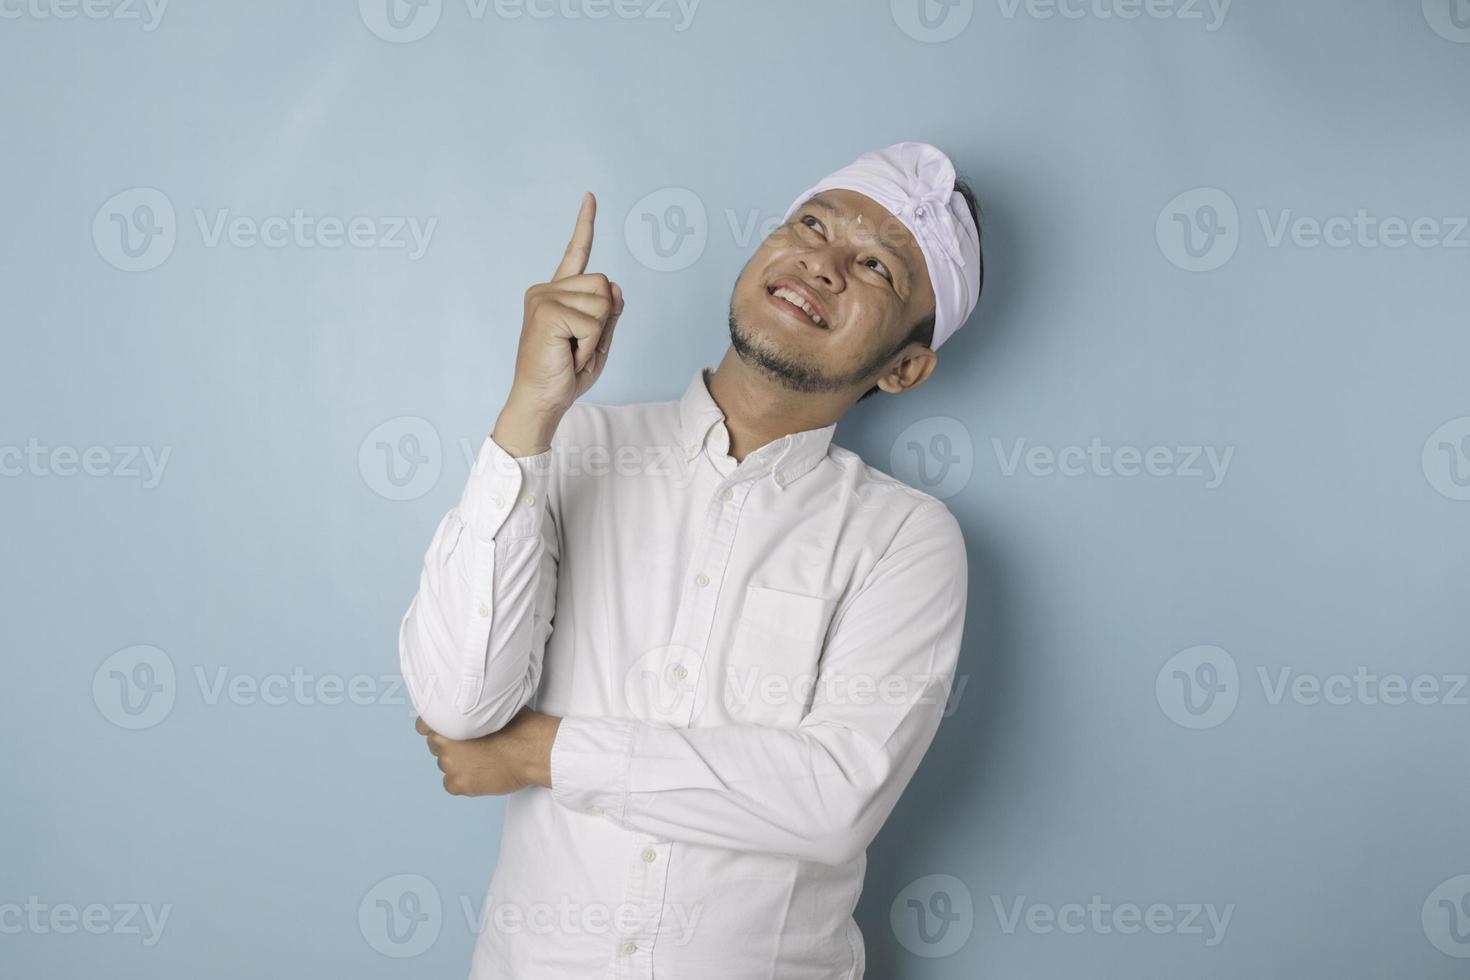 Excited Balinese man wearing udeng or traditional headband and white shirt pointing at the copy space upside him, isolated by blue background photo